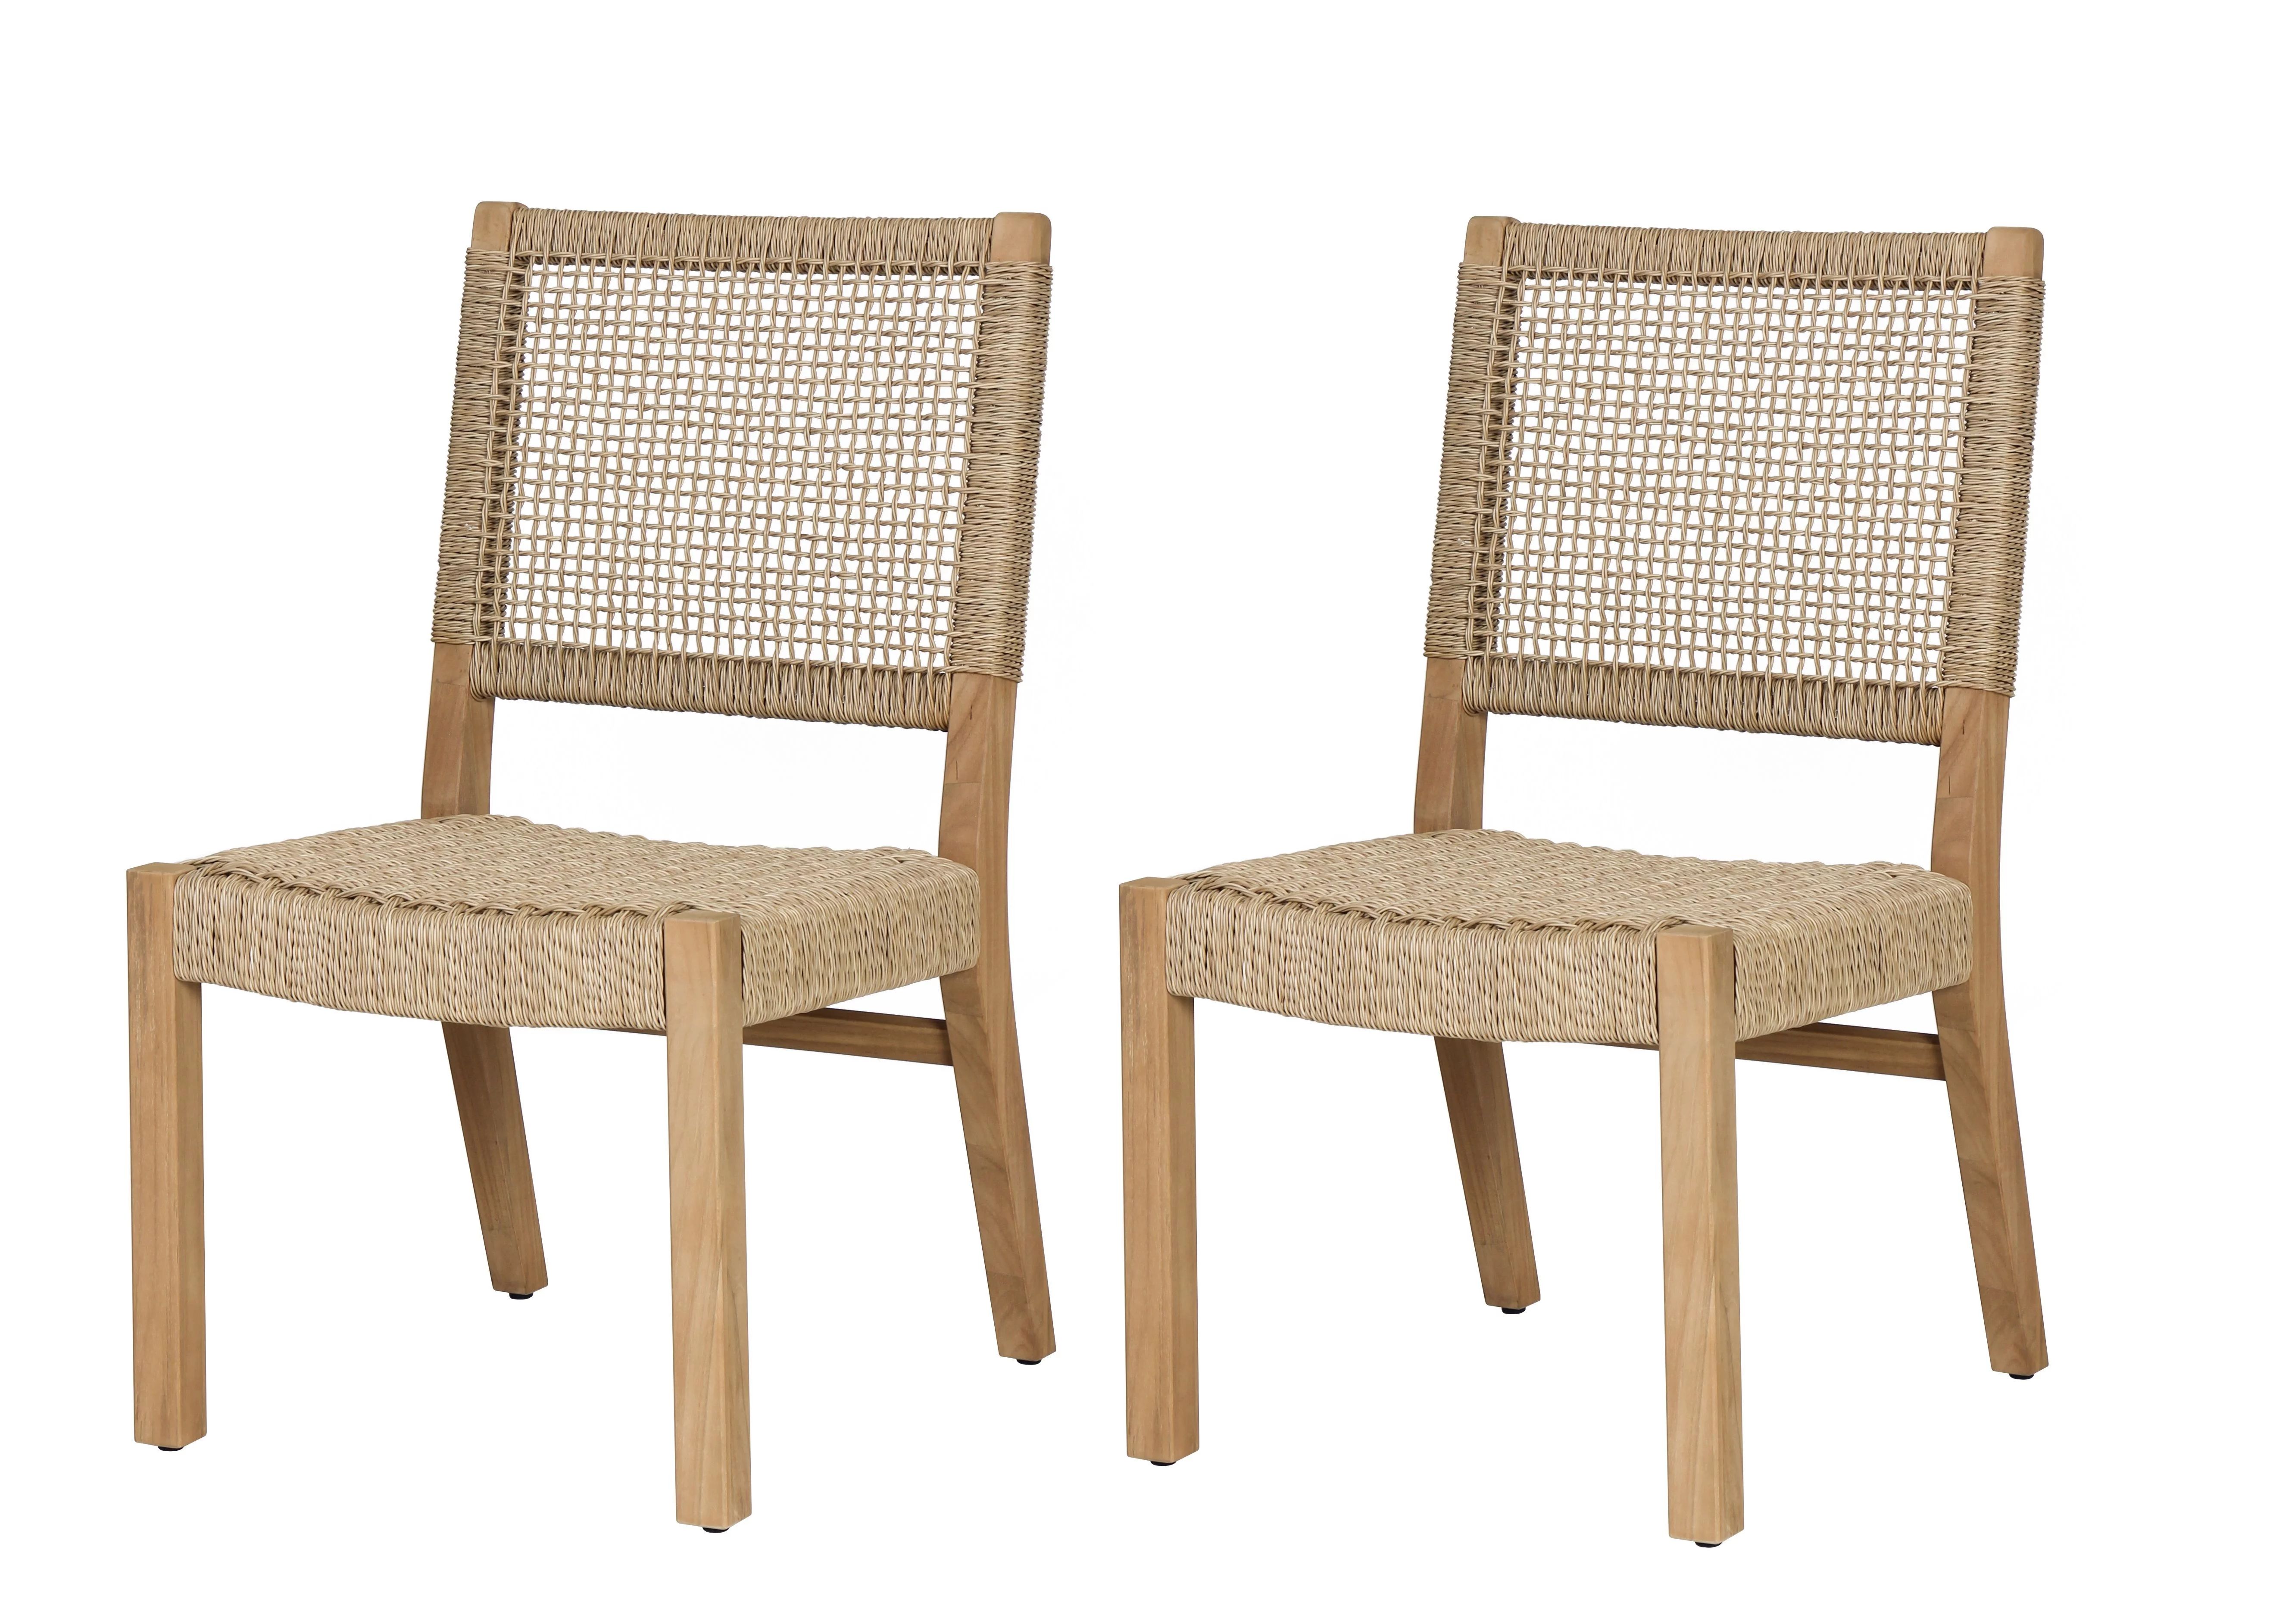 Better Homes & Gardens Ashbrook 2-Pack Teak & Wicker Dining Chairs by Dave & Jenny Marrs | Walmart (US)